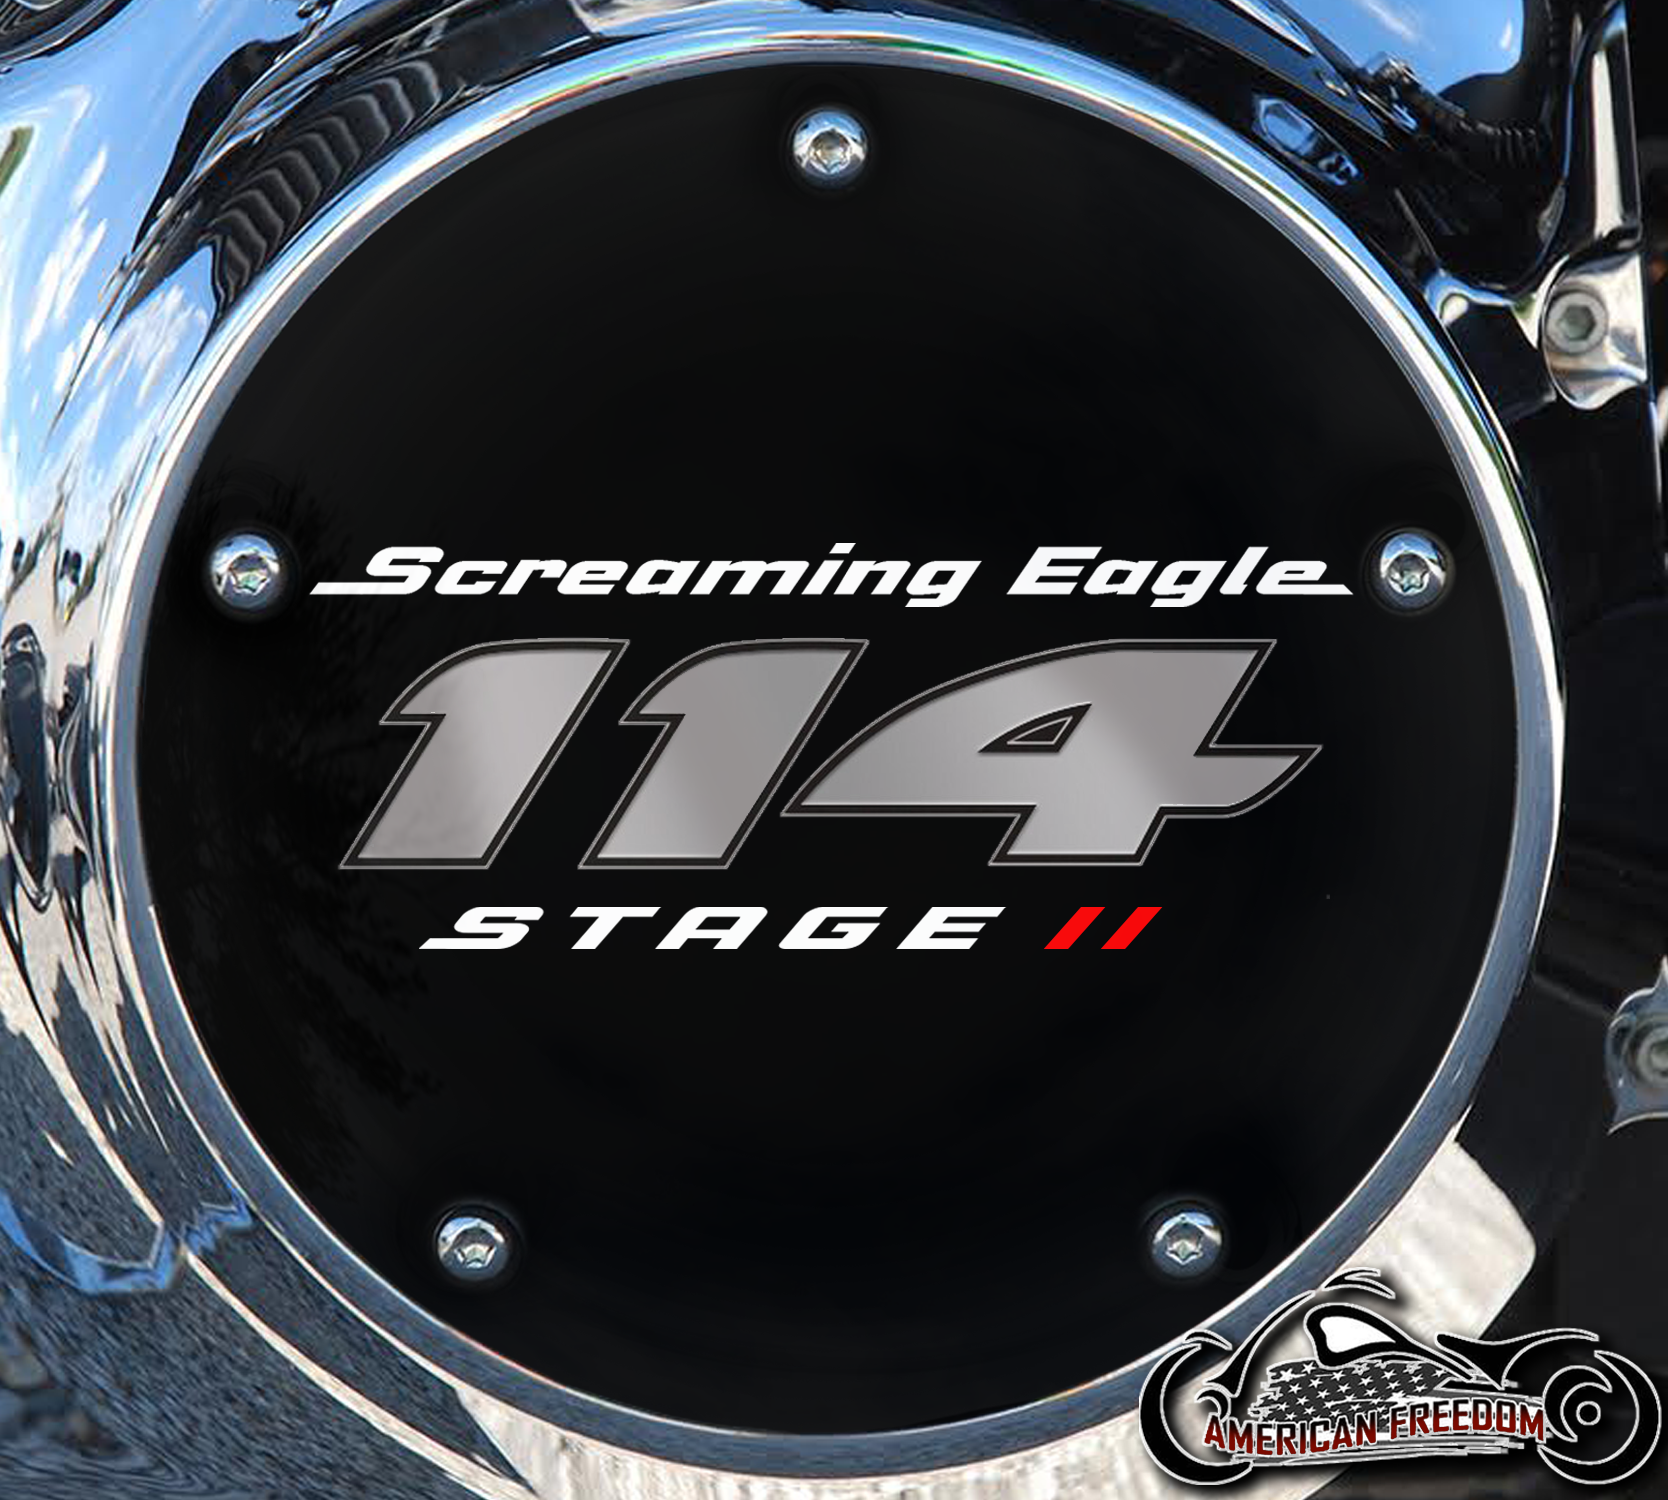 Screaming Eagle Stage II 114 DERBY COVER